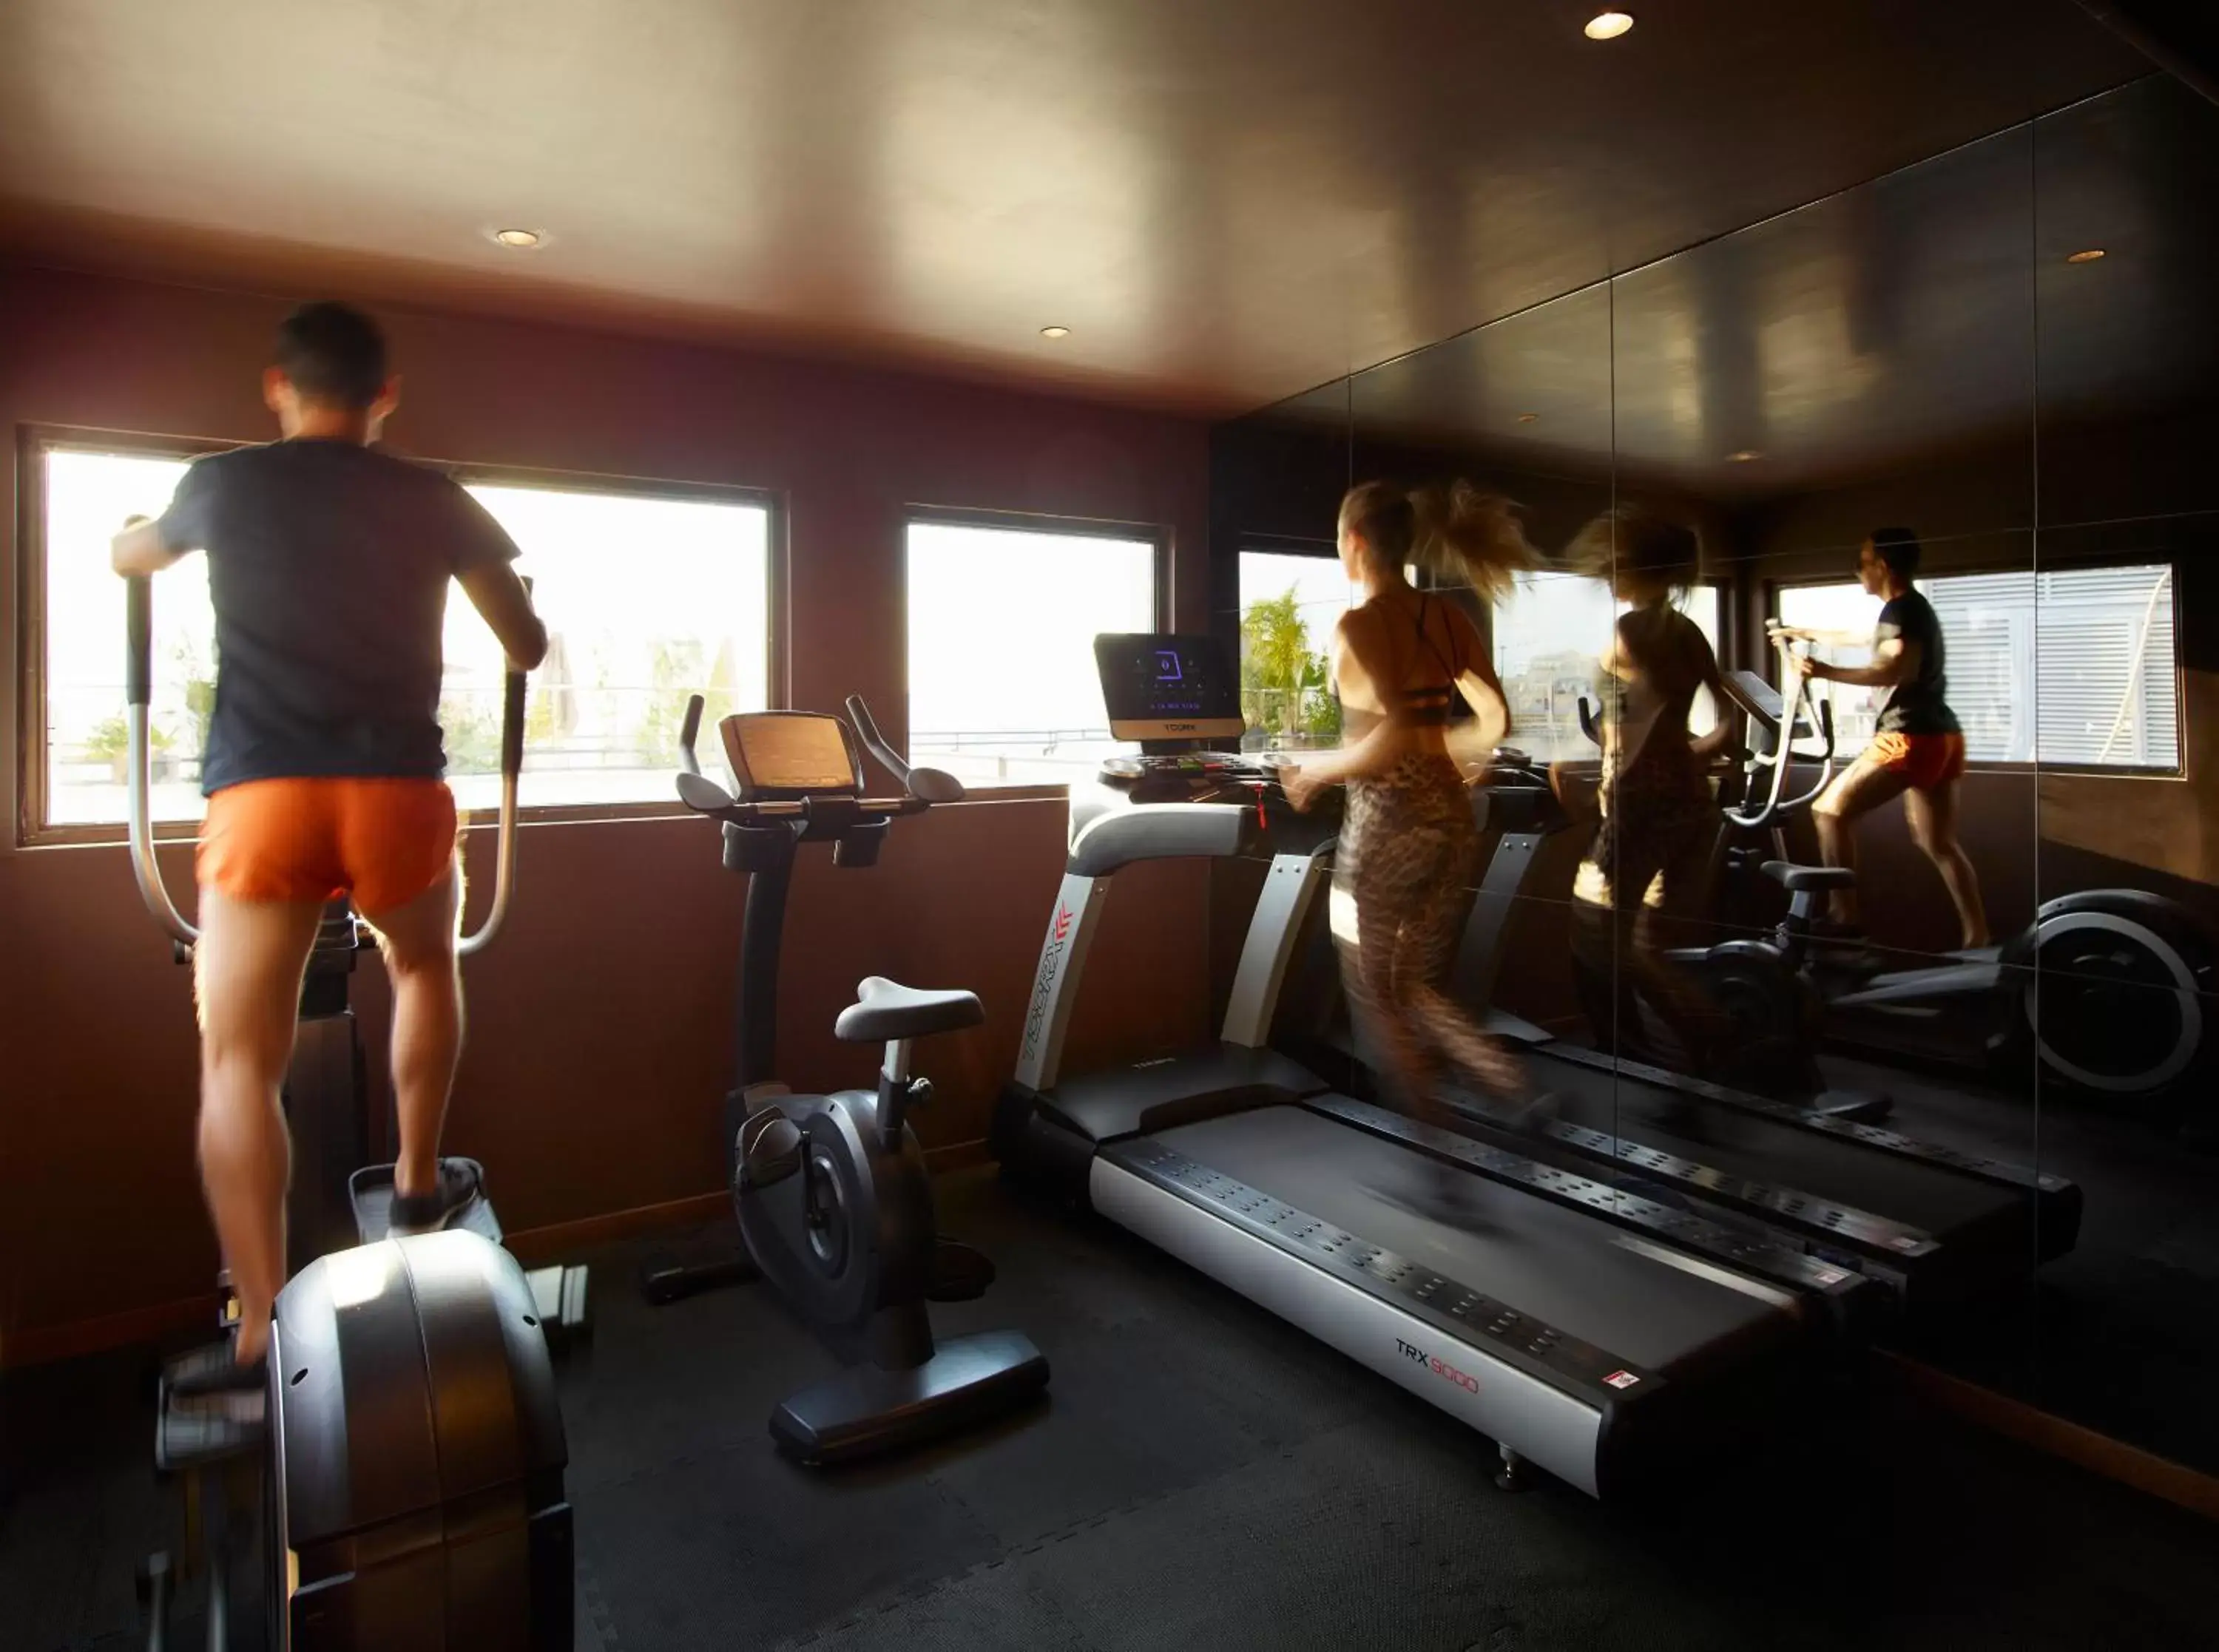 Fitness centre/facilities, Fitness Center/Facilities in Brown Acropol, a member of Brown Hotels